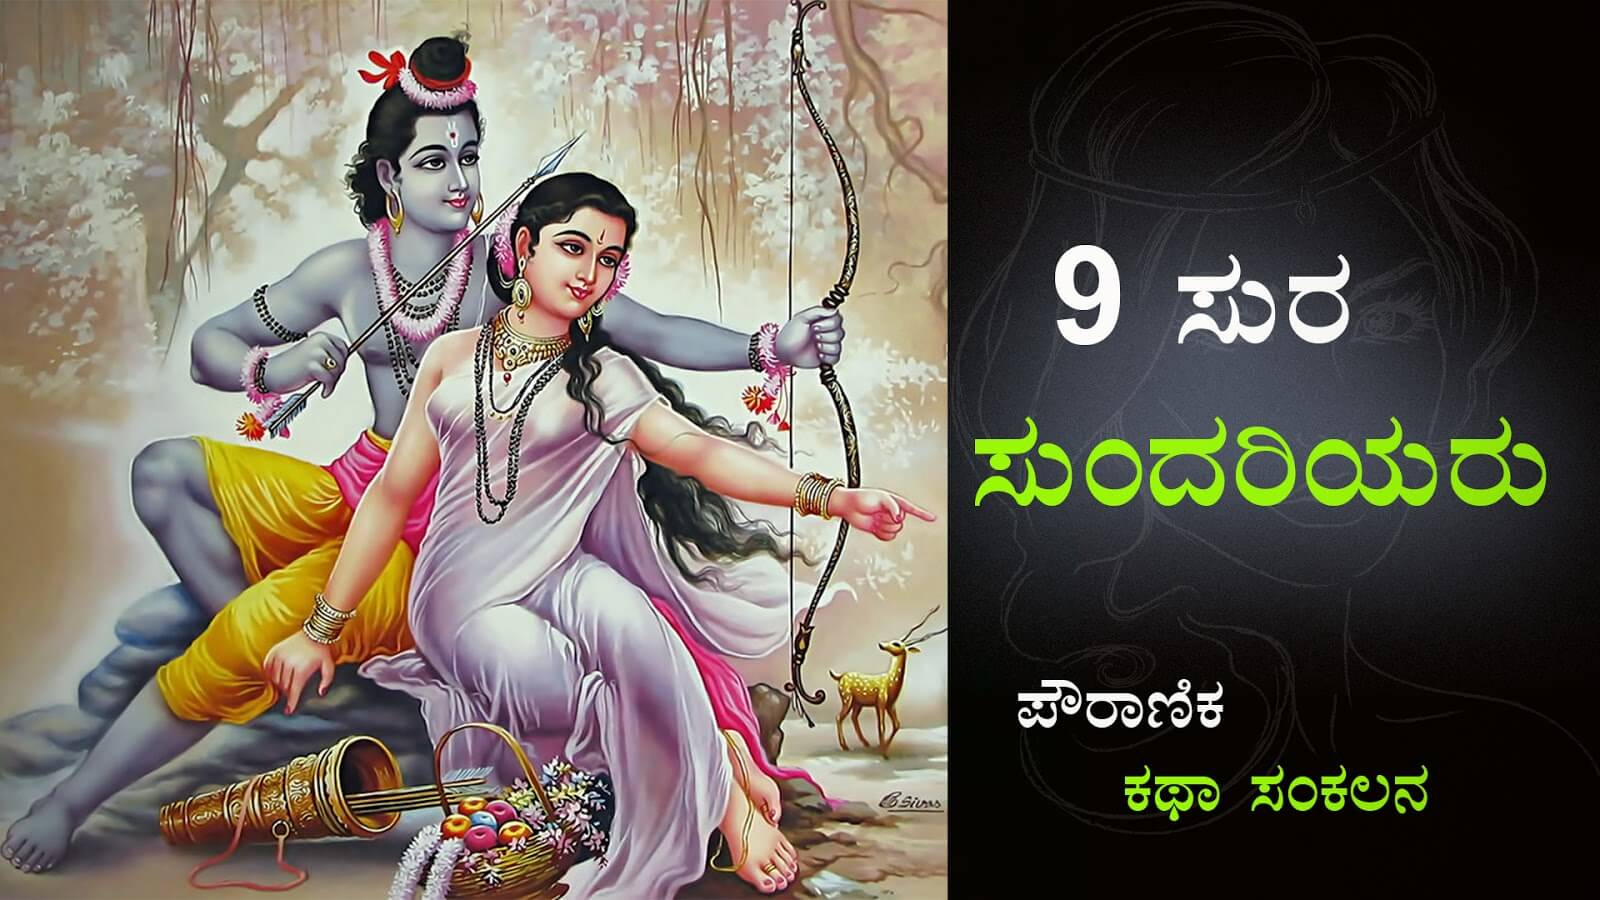 You are currently viewing 9 ಸುರಸುಂದರಿಯರು : 9 Beautiful Women from Ramayana and Maha Bharat in Kannada